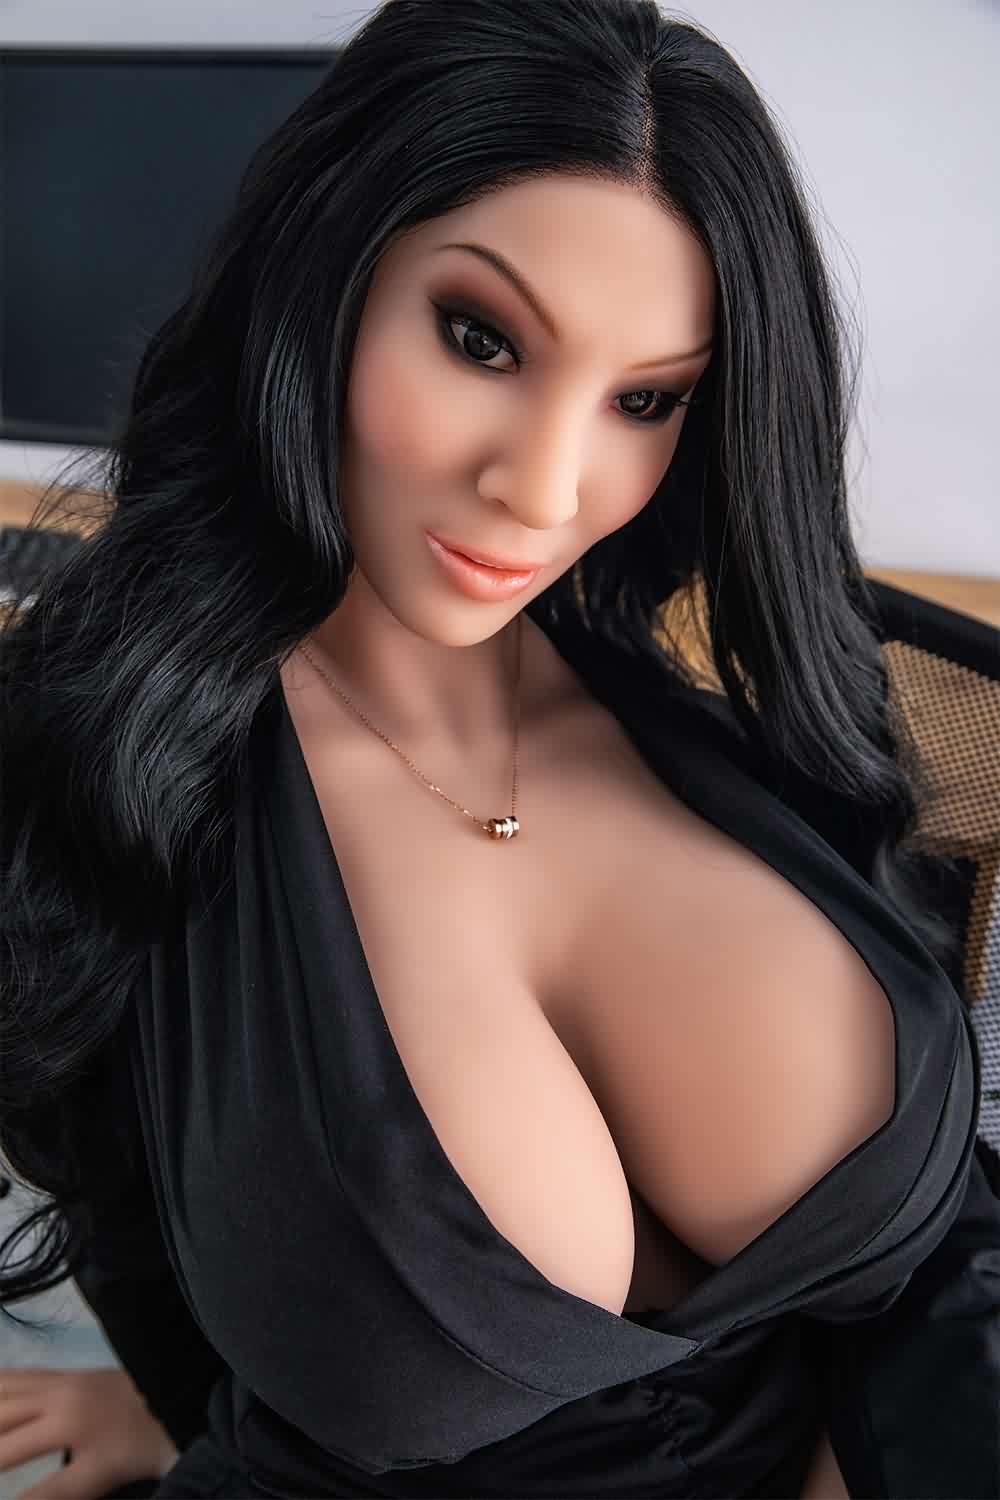 Old Lady Sex Doll